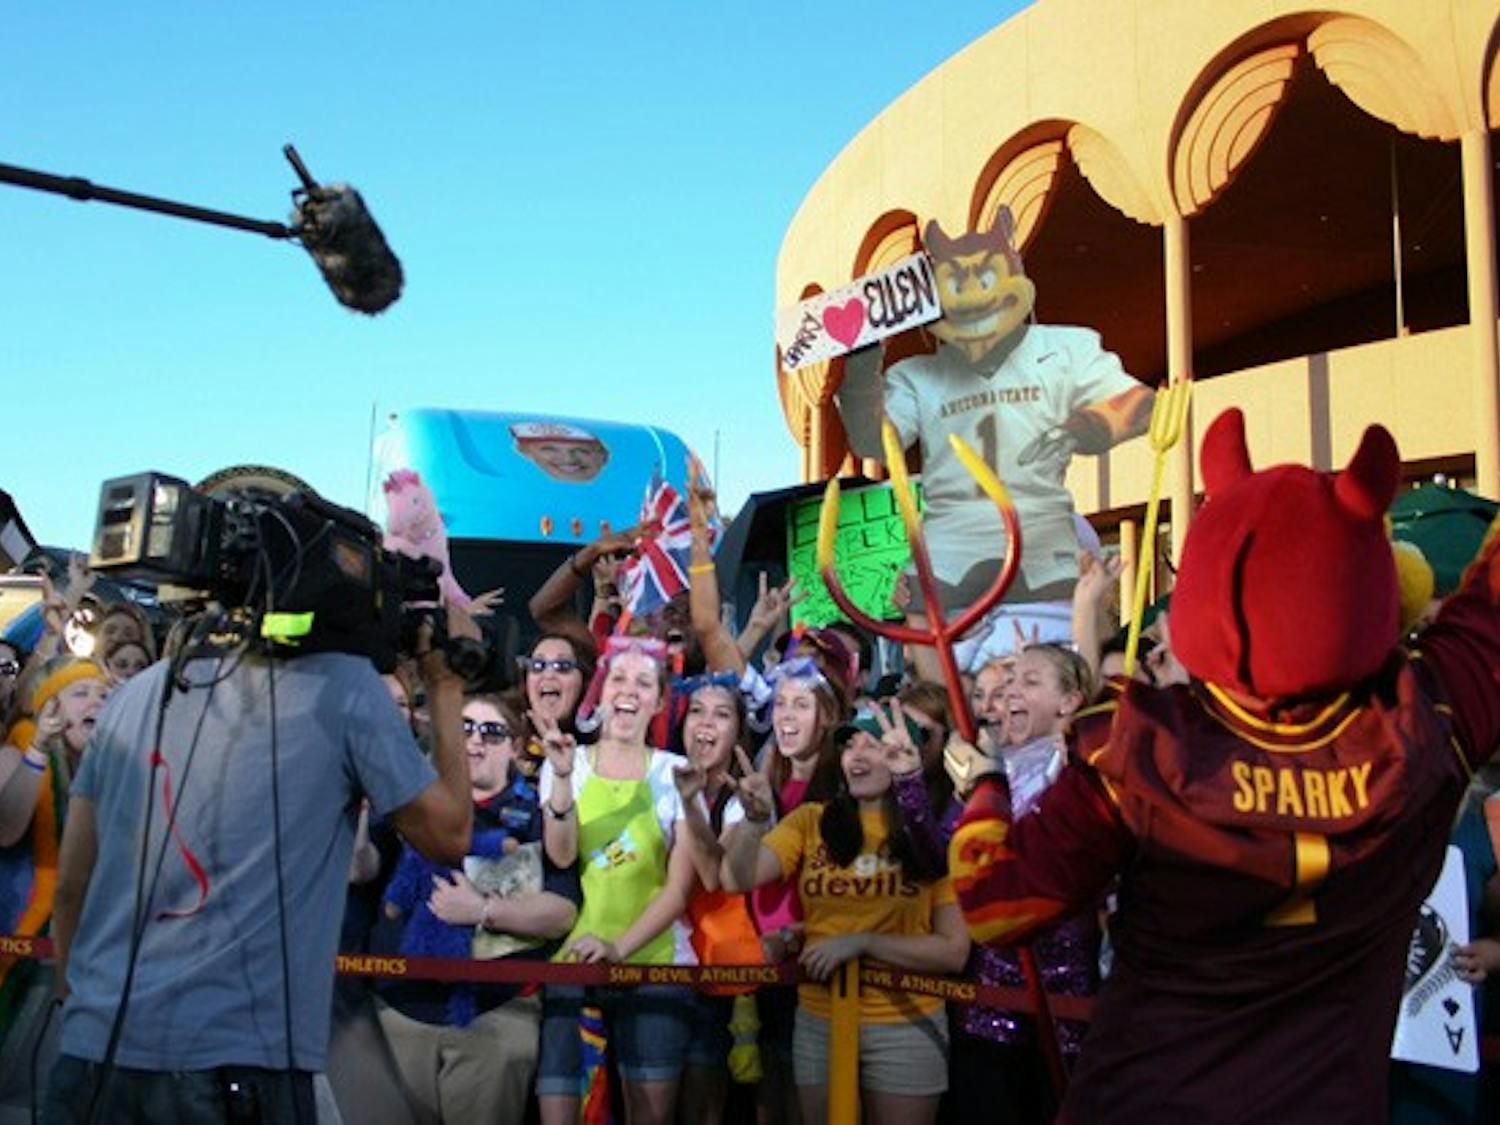 BIG TRUCKIN DEAL: ASU students gathered in front of Gammage Auditorium for over fours to appear on The Ellen Show, which filmed Tuesday in Tempe.  Tempe was the first stop in Ellen Degeneres' "Big Truckin Deal" tour. (Photo by Lisa Bartoli)